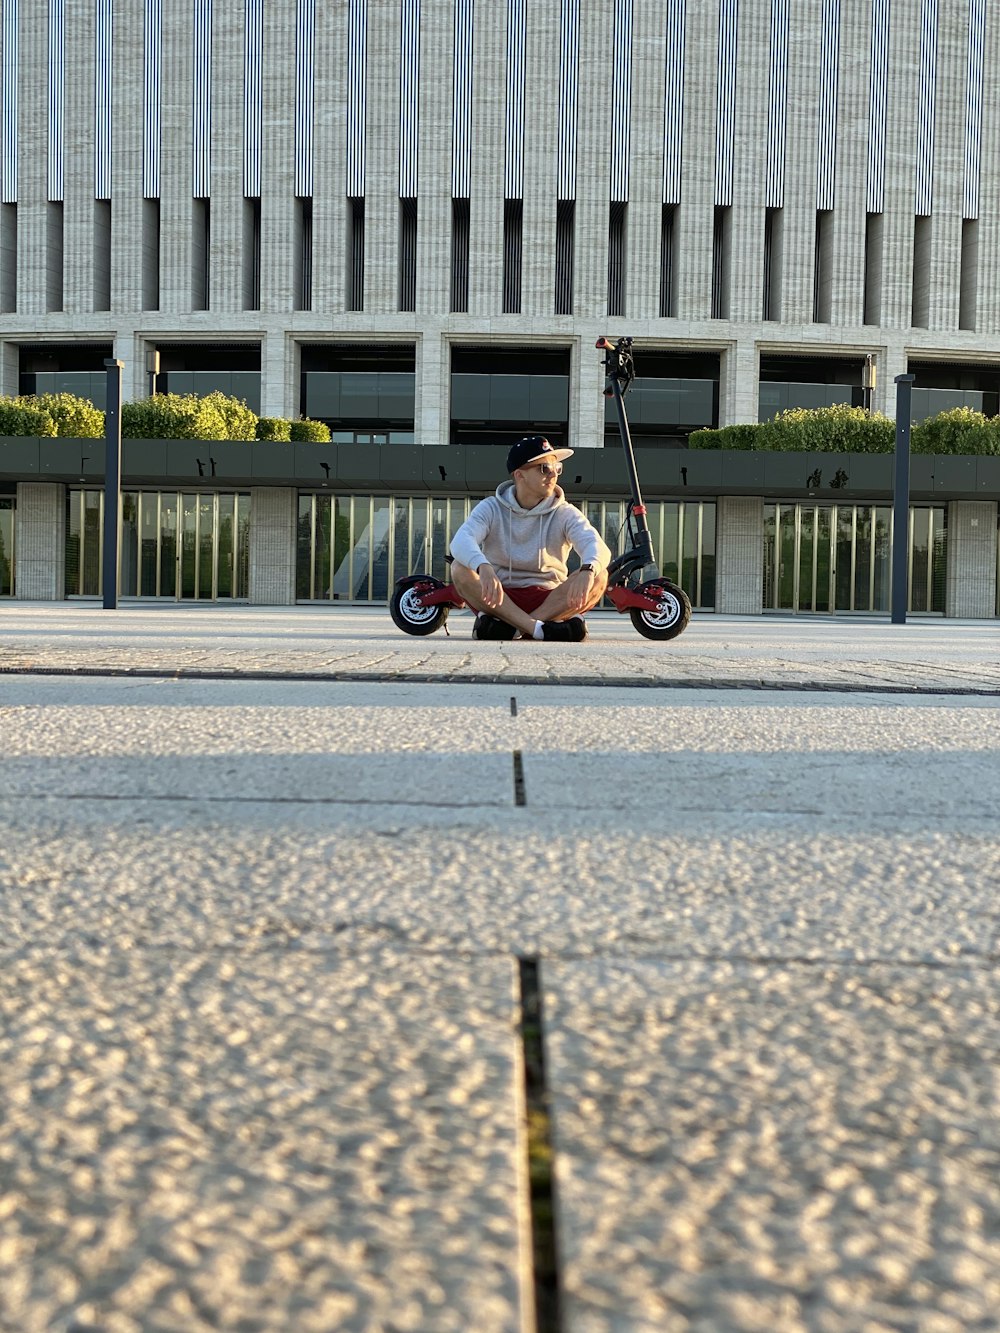 man in black shirt riding on black and white bicycle on gray concrete road during daytime